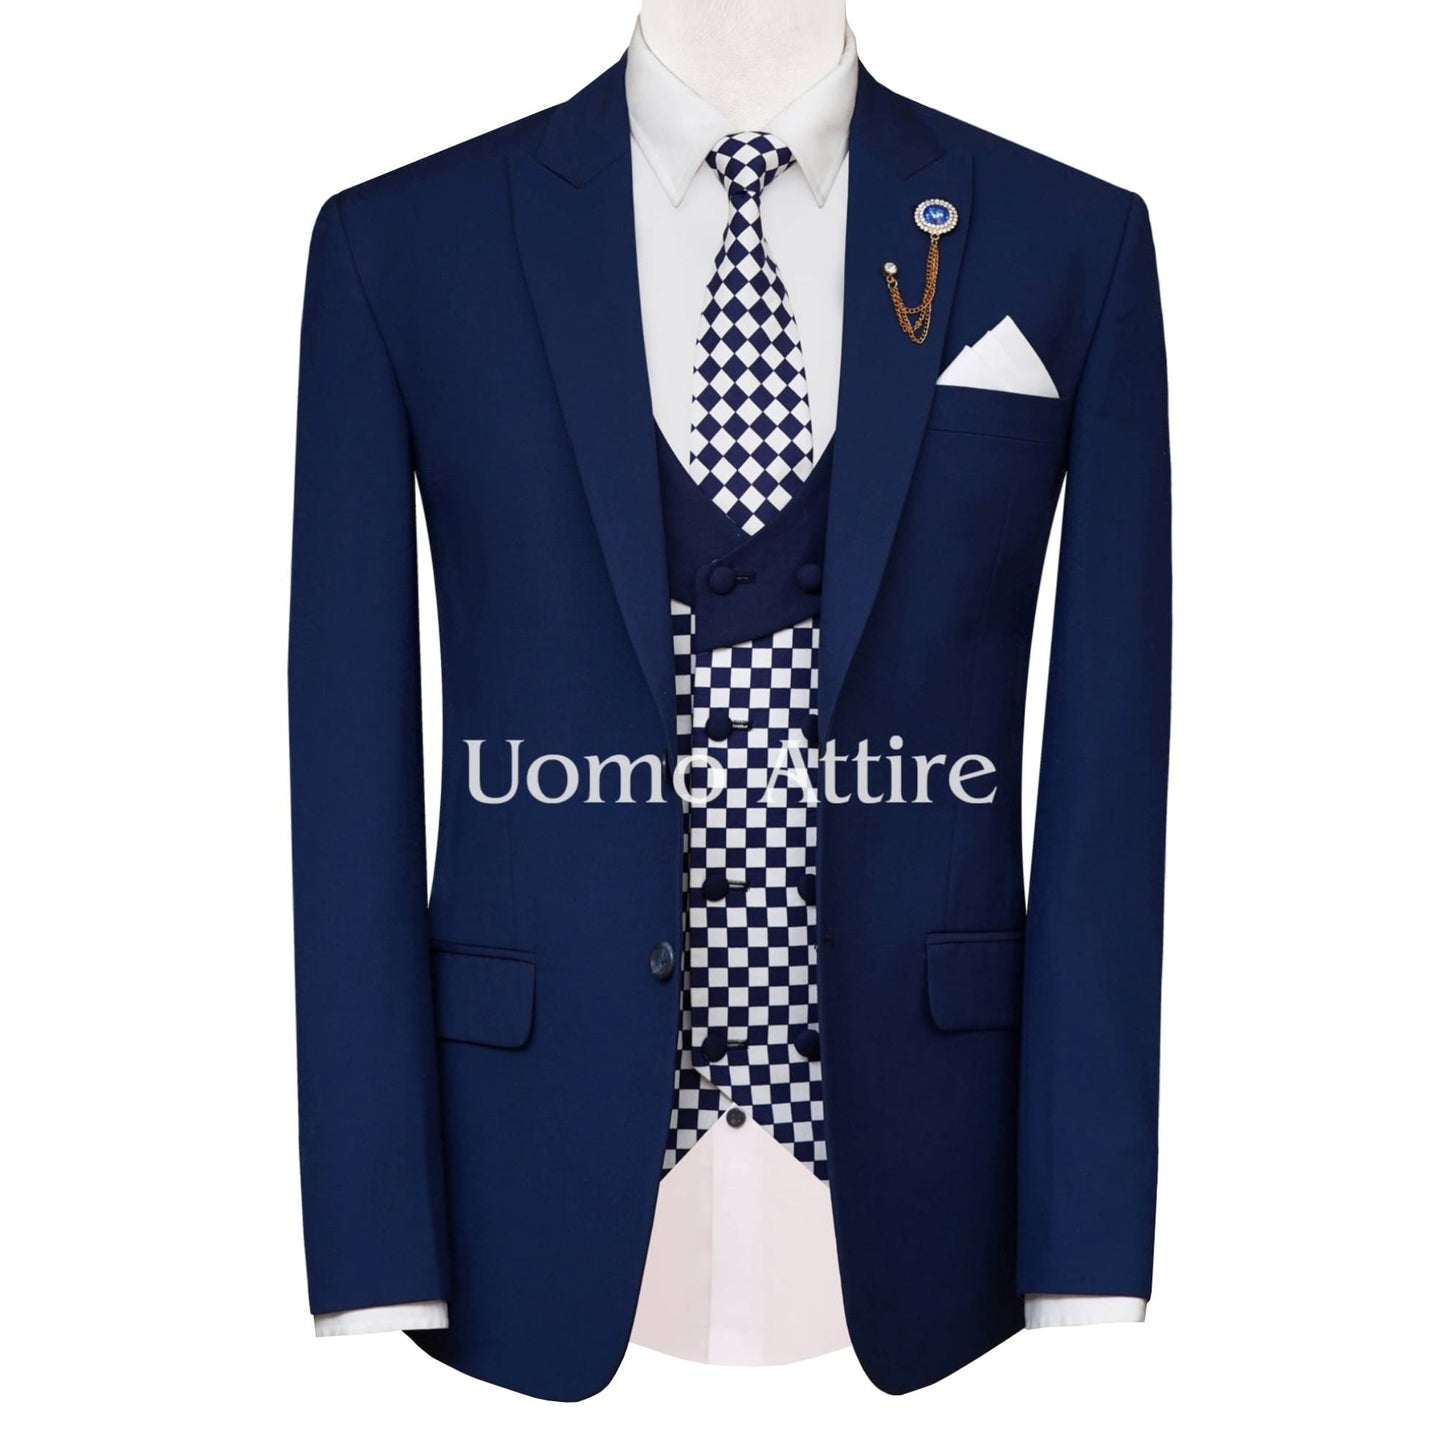 Discover more than 189 wedding court suit